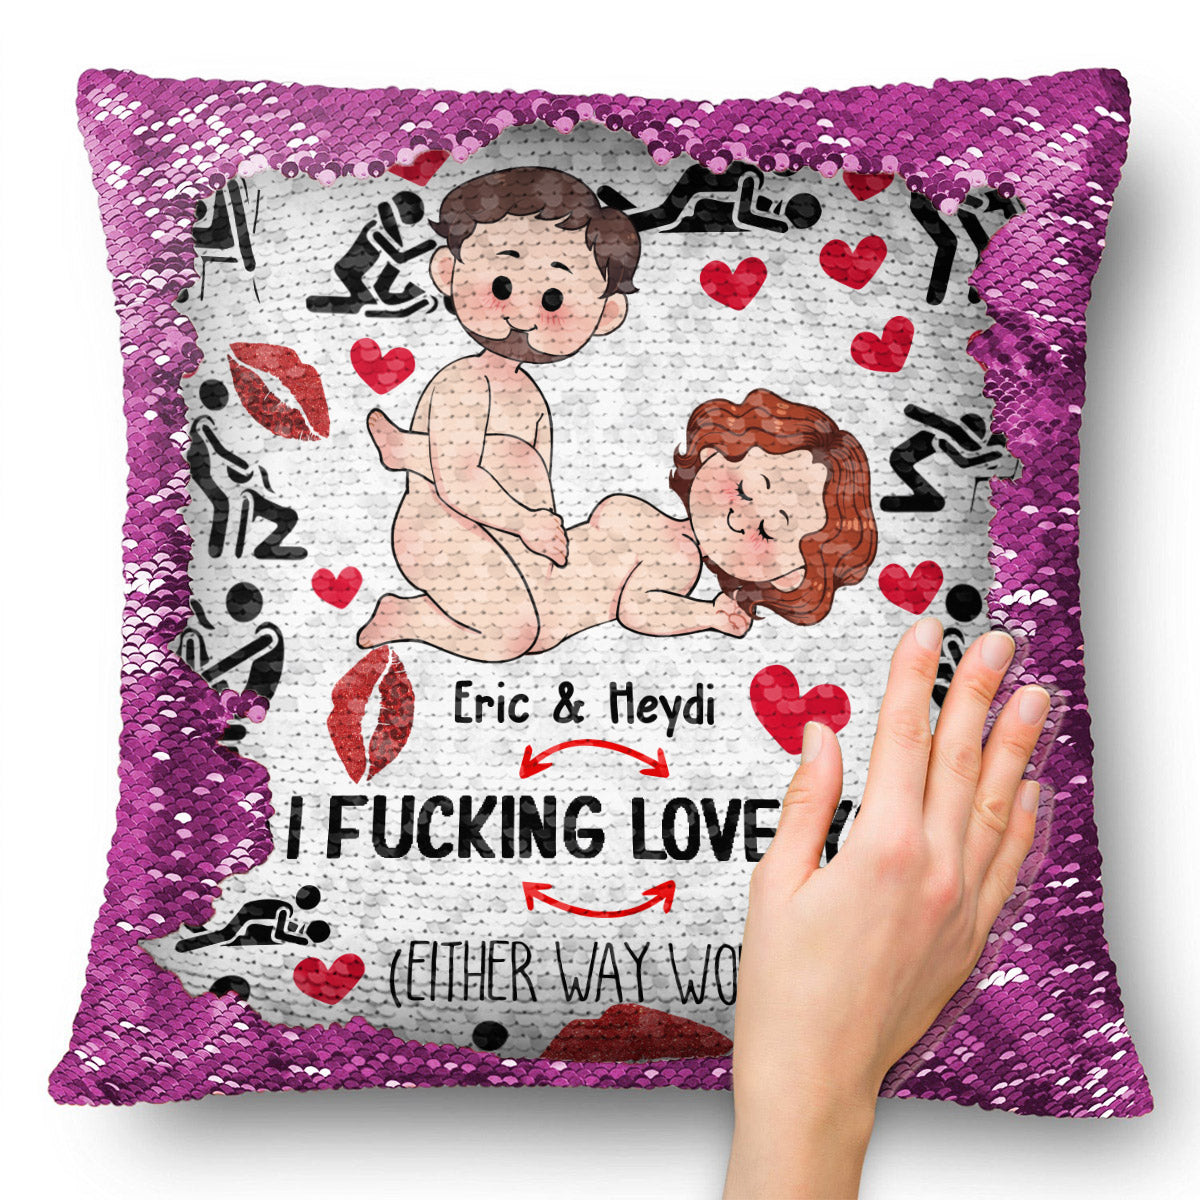 I Love You - Personalized Couple Sequin Pillow Cover